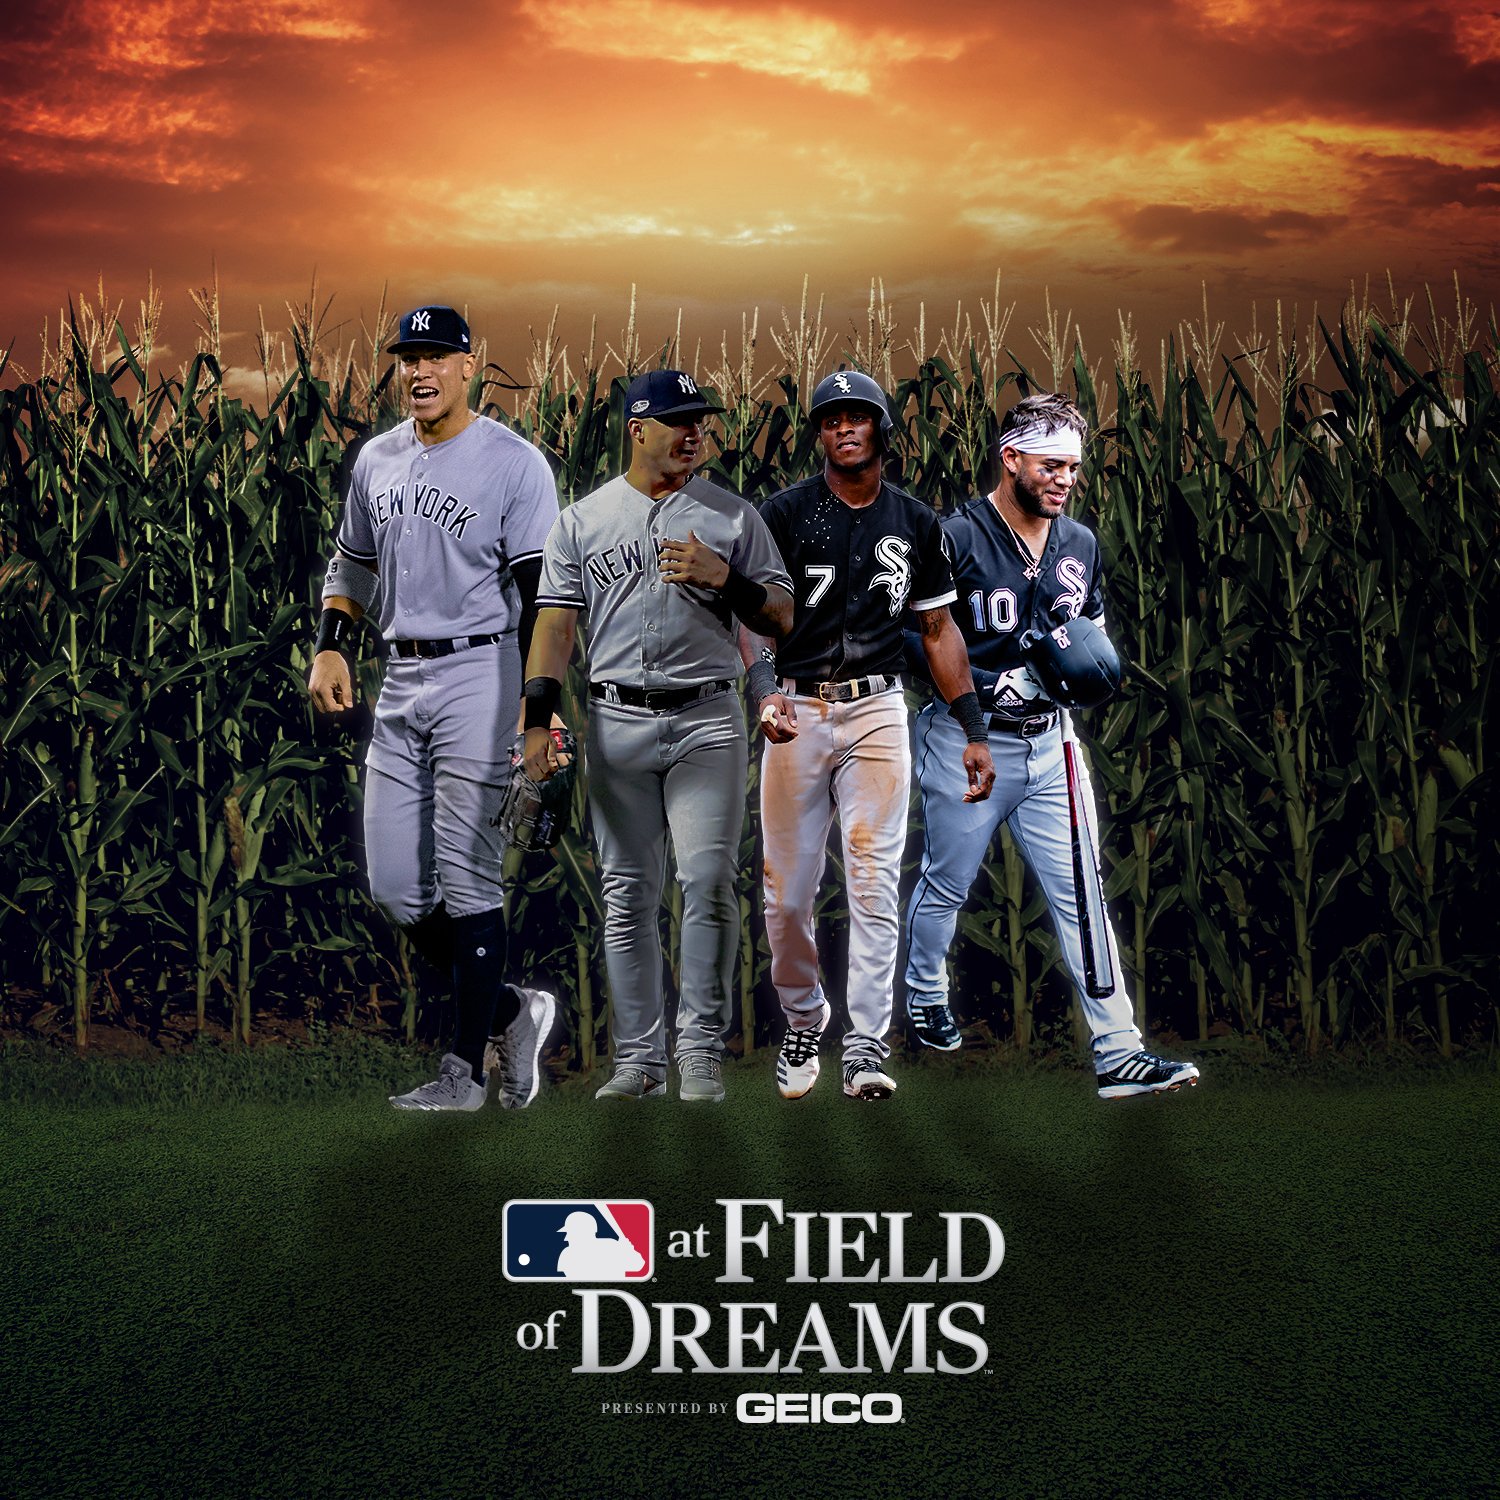 MLB unveils custom uniforms for Field of Dreams game between White